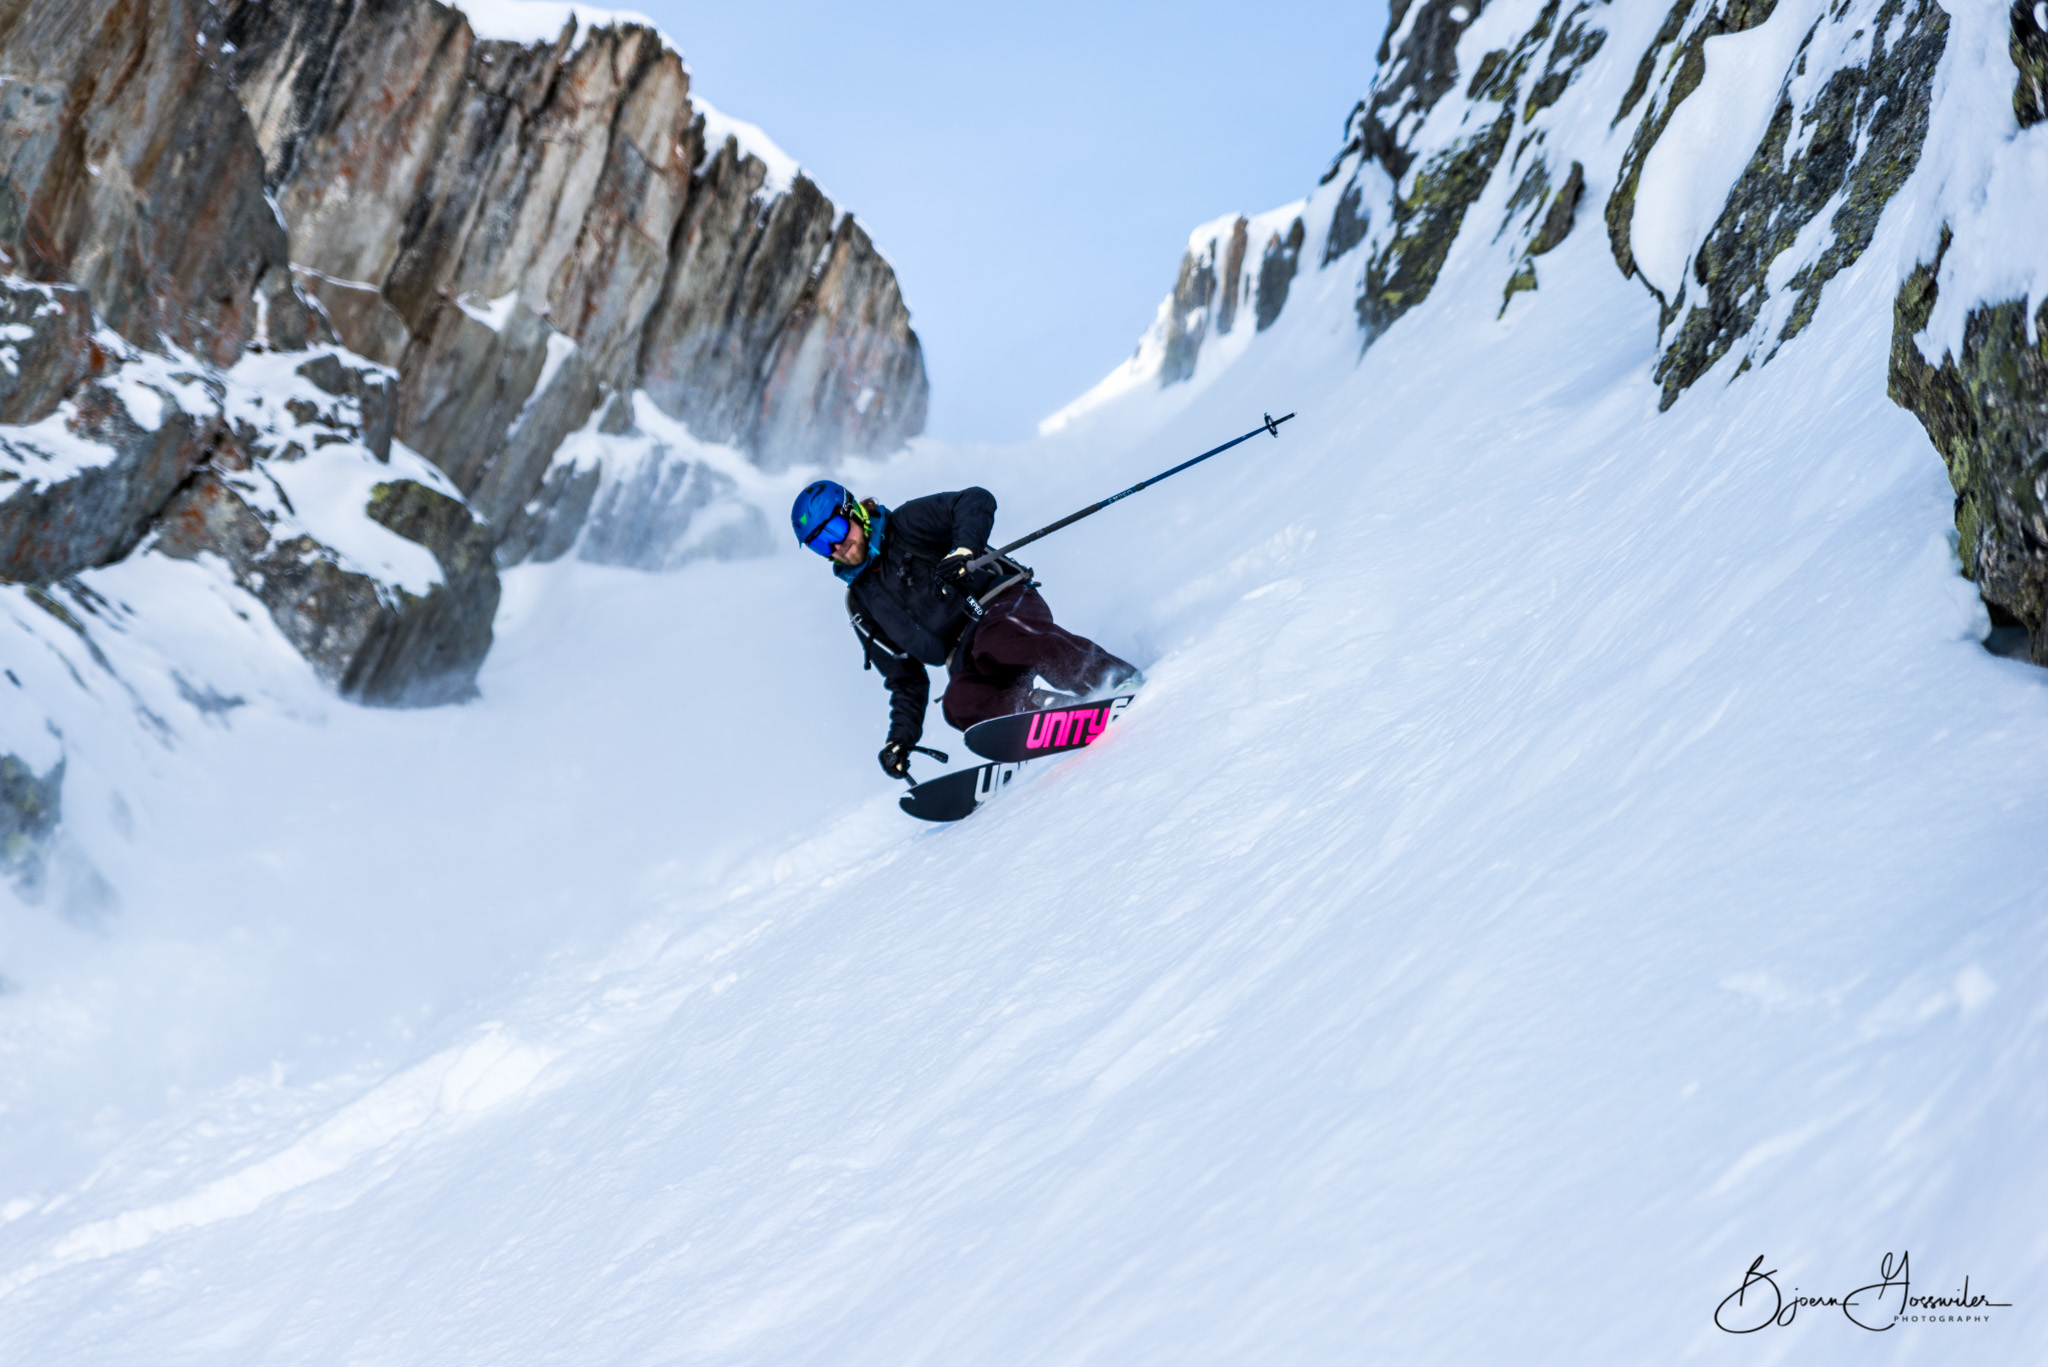 Fred rides this nice couloir